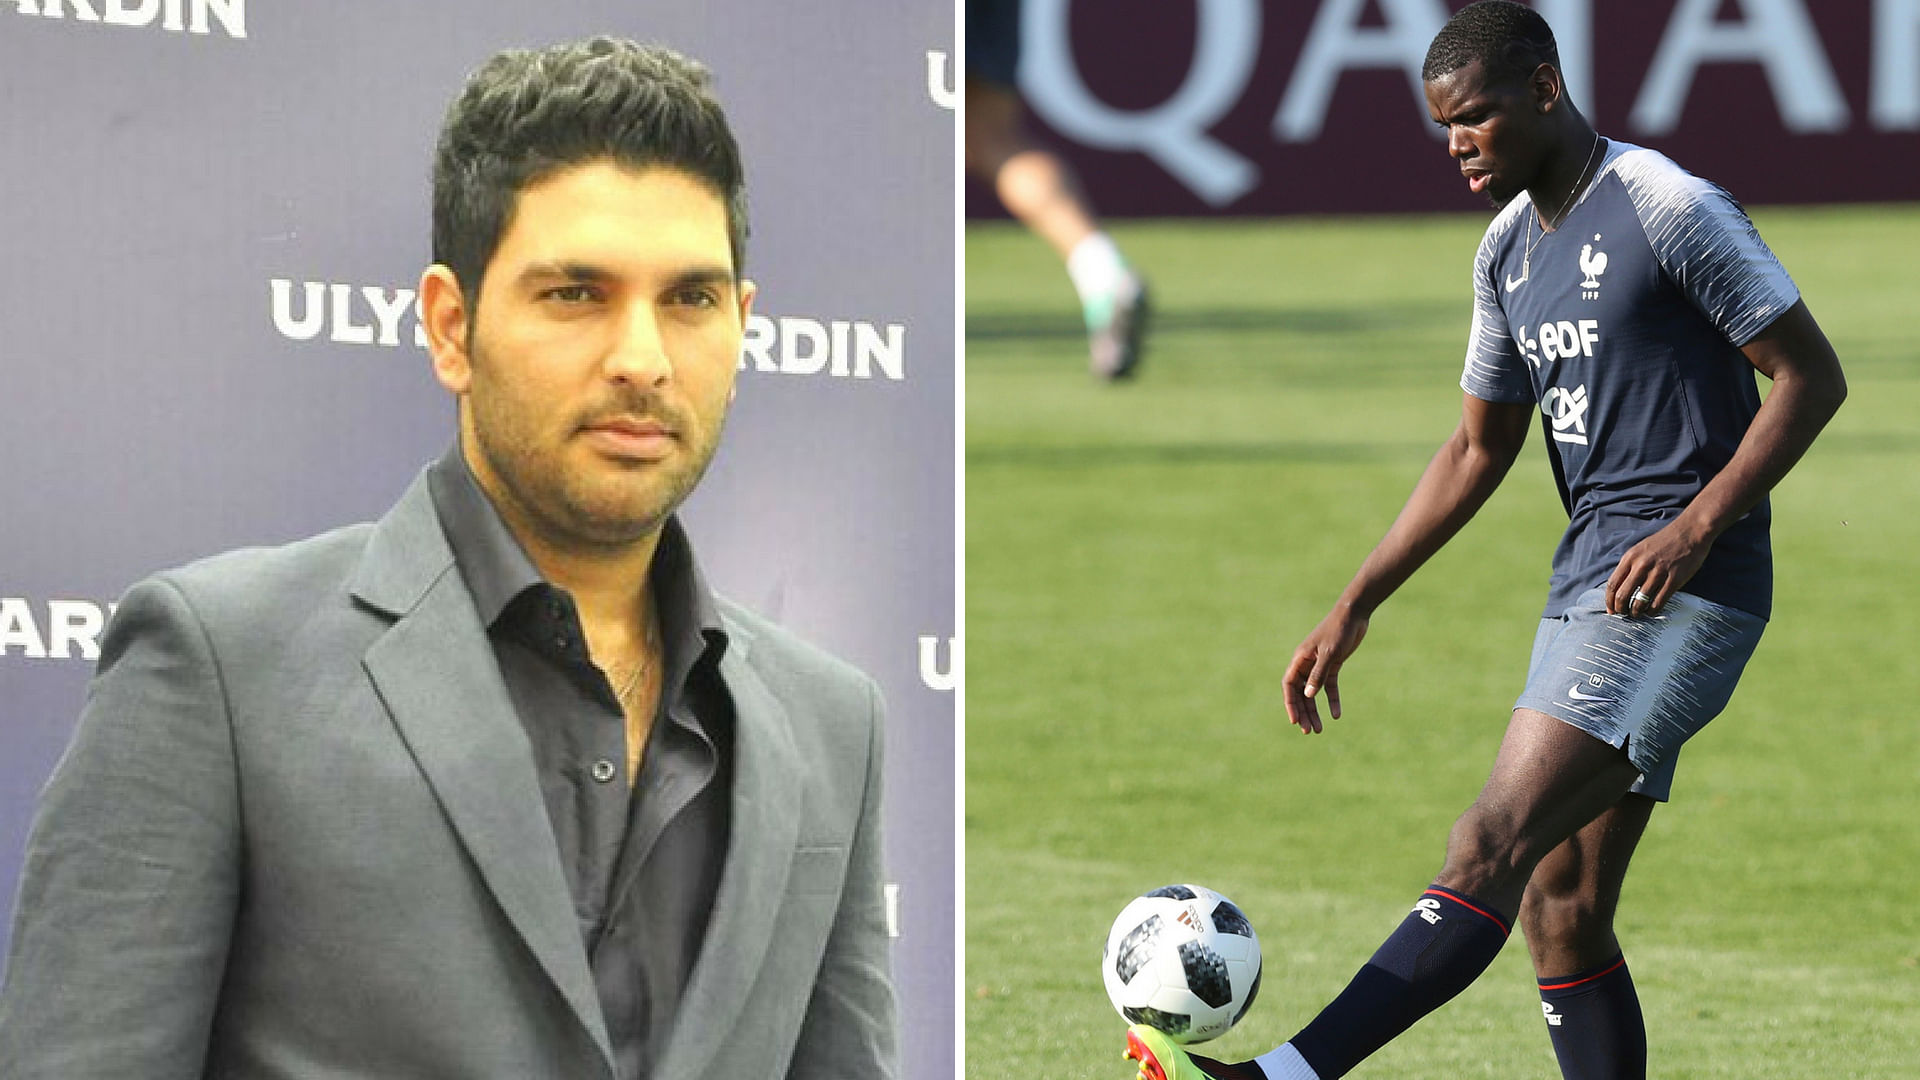 Yuvraj Singh is a big fan of Manchester United star Paul Pogba (right) and is counting on him to carry France deep into the 2018 FIFA World Cup.